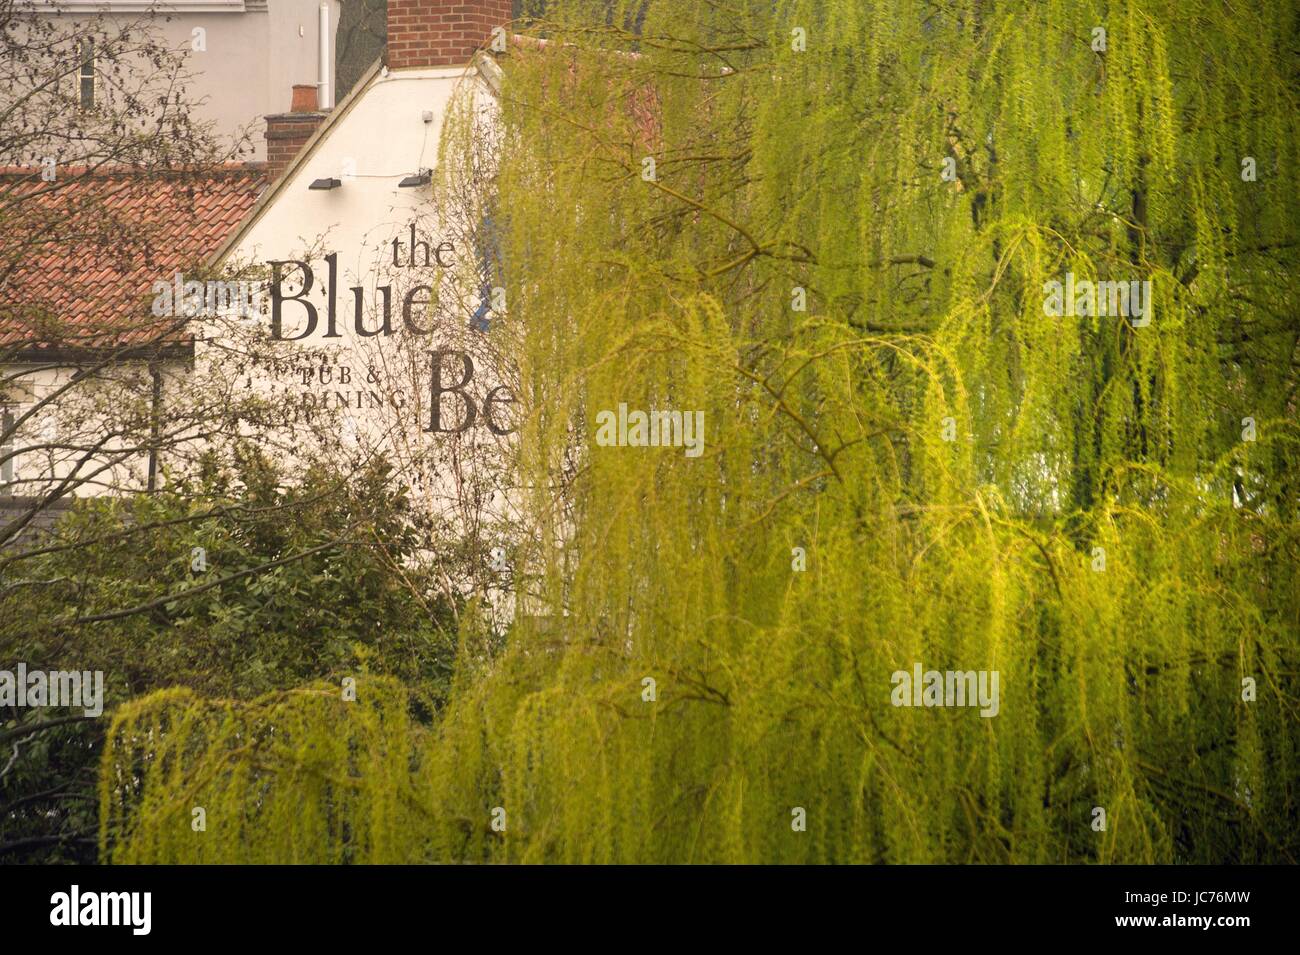 Weeping Willow next to The Blue Bell pub, Yarm Stock Photo